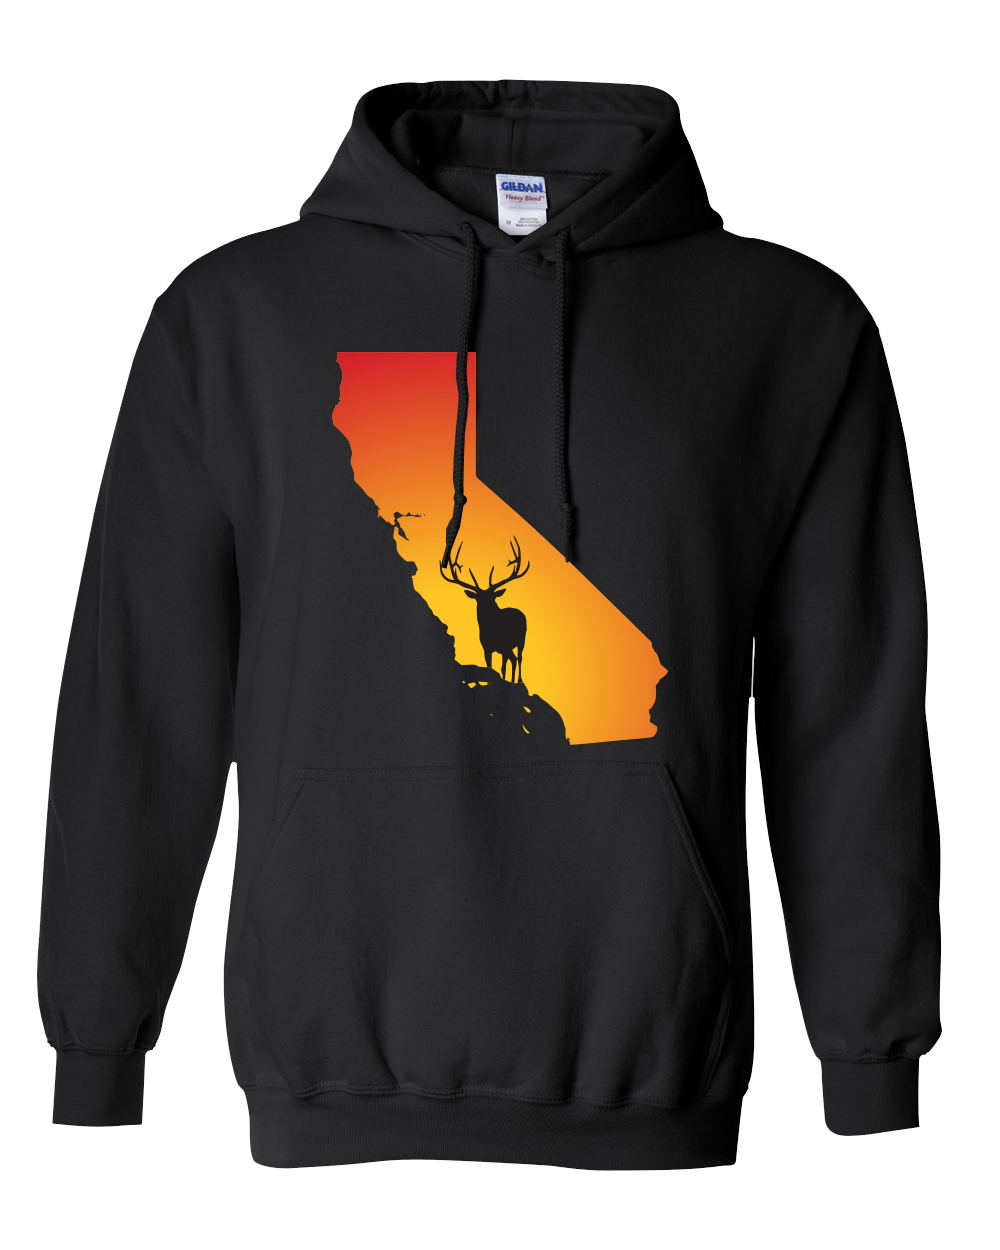 Pullover Hooded Sweatshirt California Black Elk Vibrant Design High Quality Tight Knit Ring Spun Low Maintenance Cotton Printed With The Newest Available Color Transfer Technology